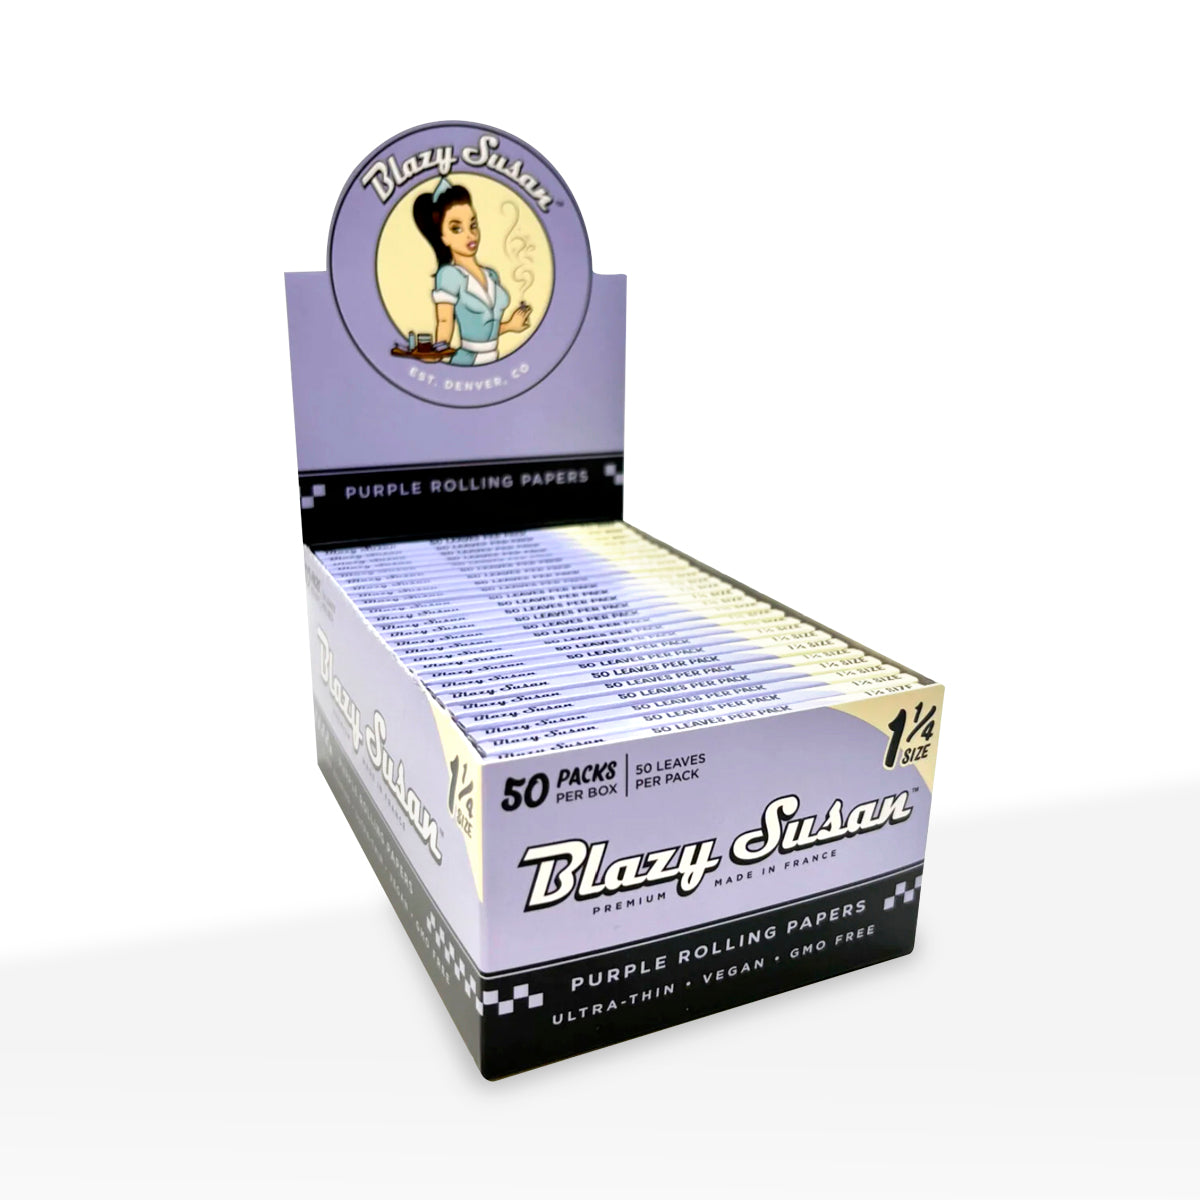 Blazy Susan 1 1/4" Purple Rolling Papers - 50 Pack